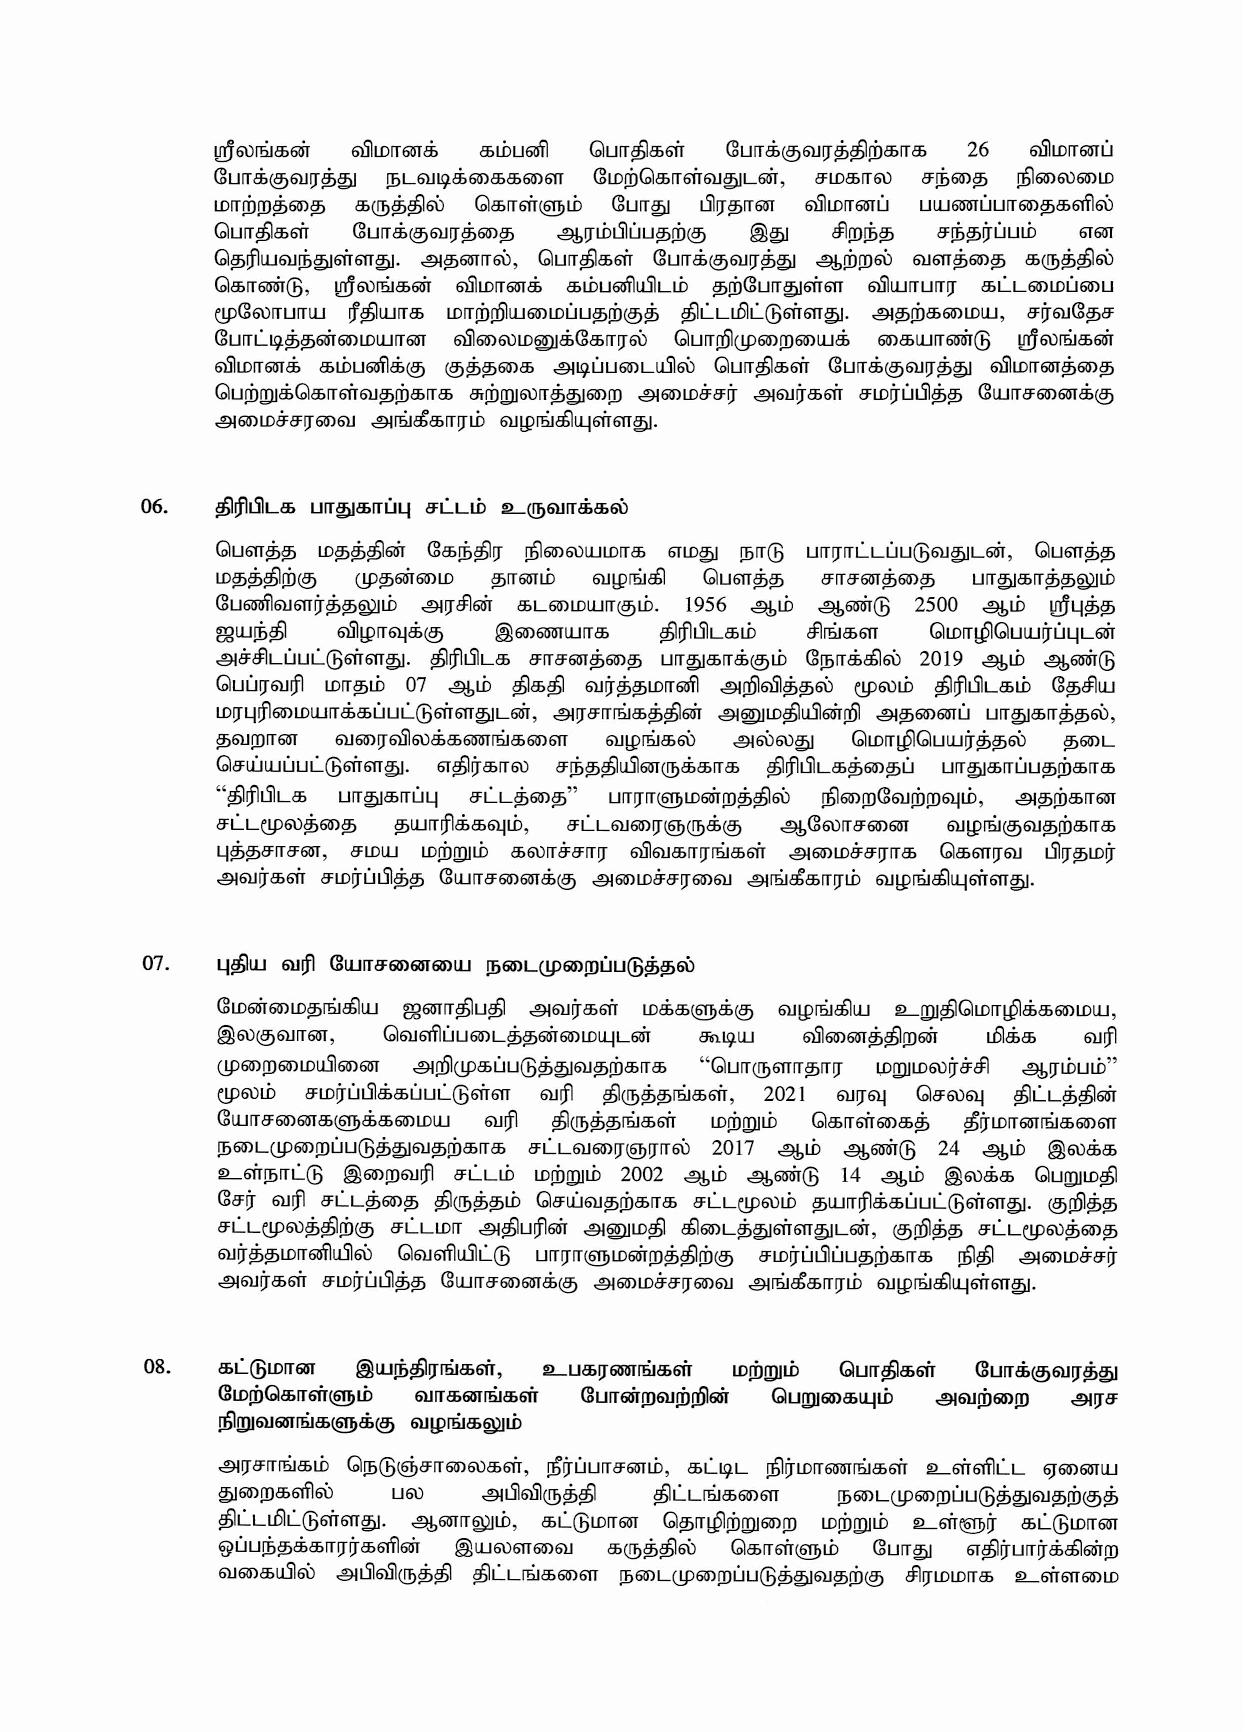 Cabinet Decision on 15.03.2021 Tamil page 003